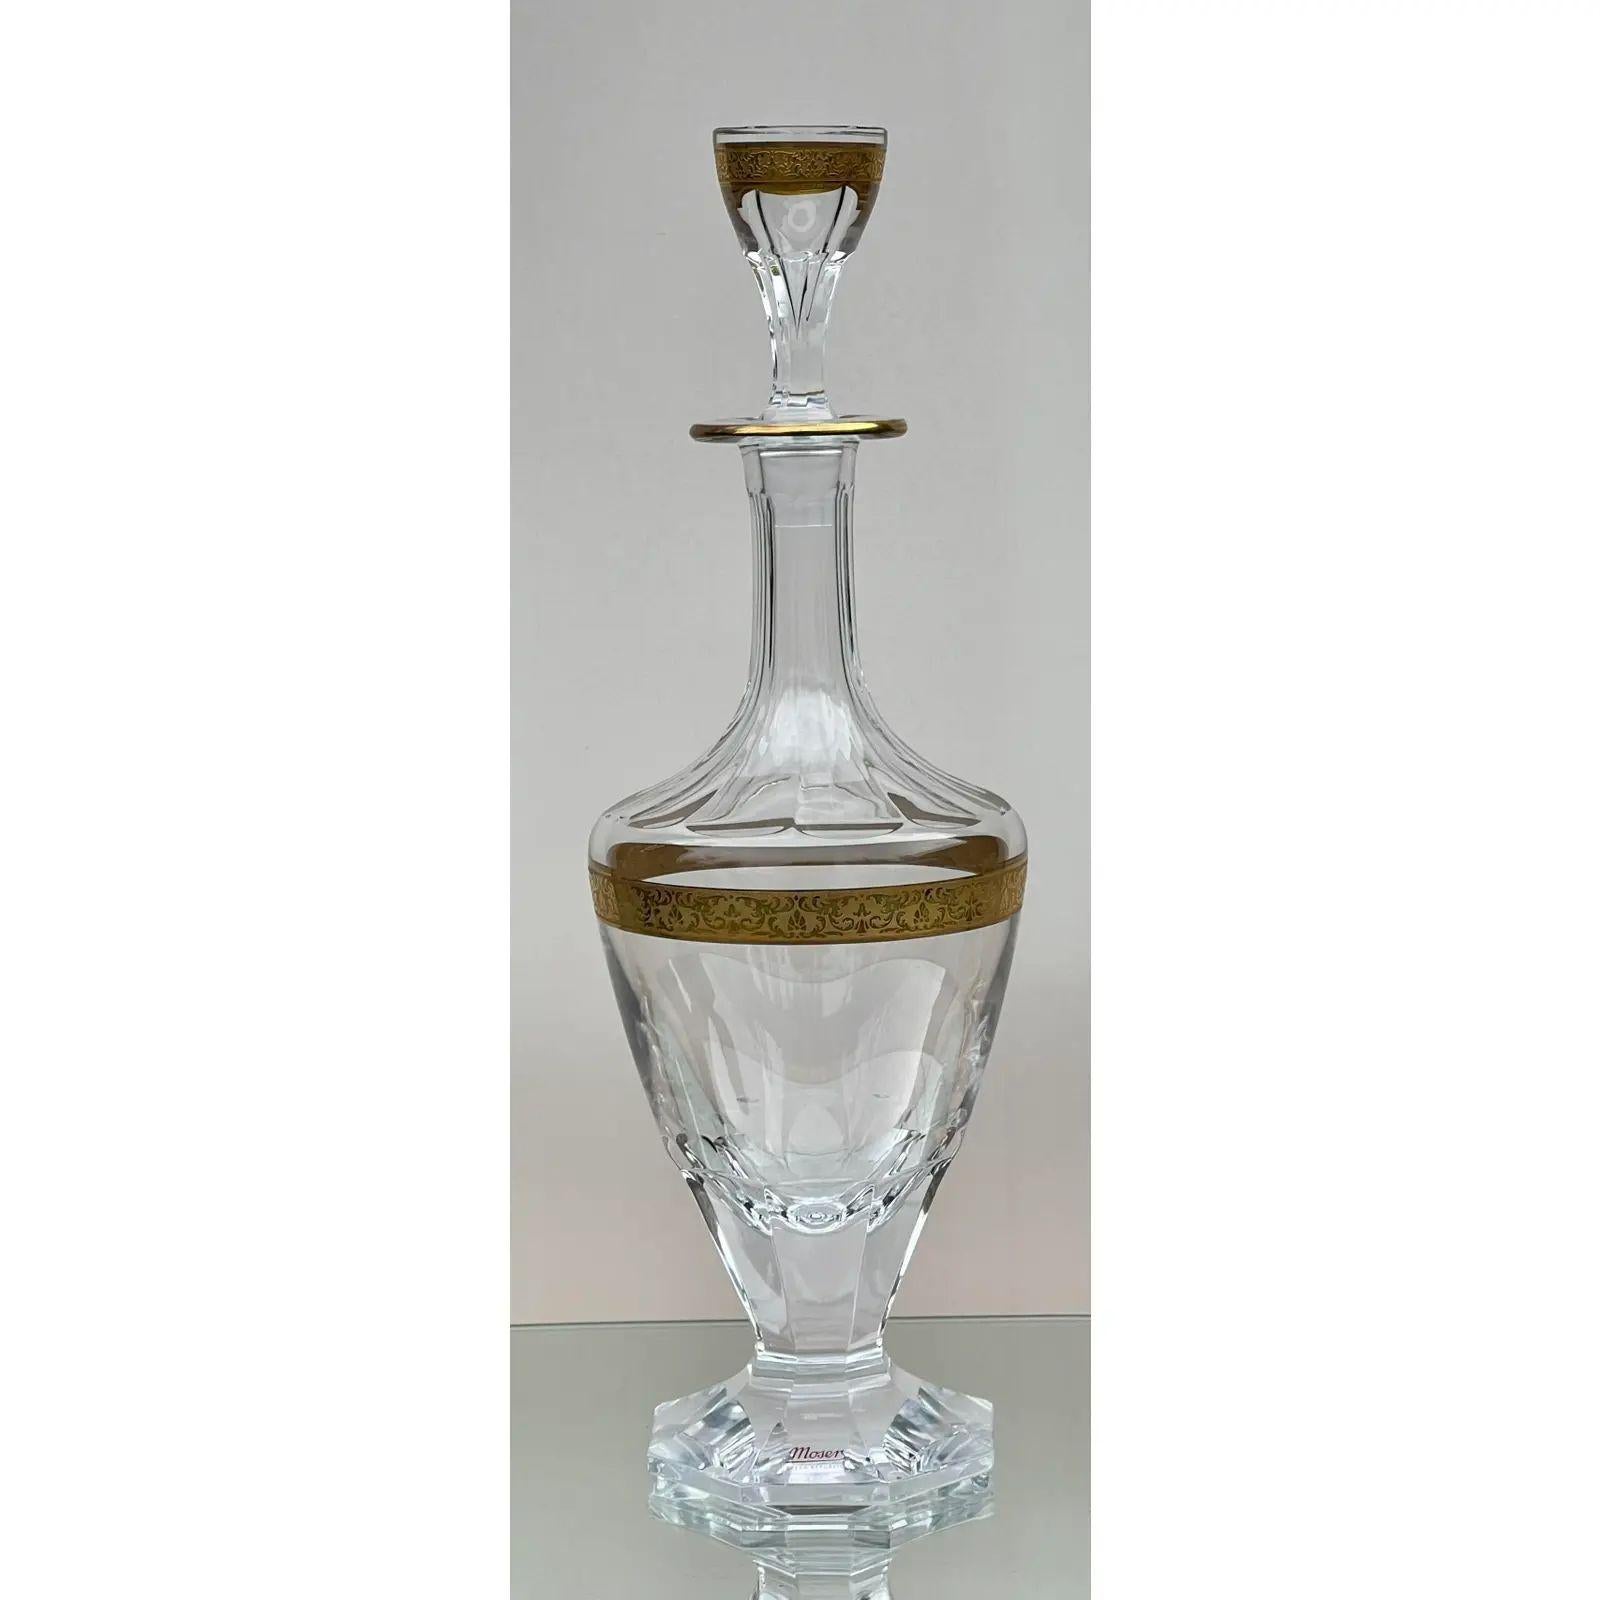 20th Century Moser Gold Encrusted Crystal Carlsbad Decanter, 1980s For Sale